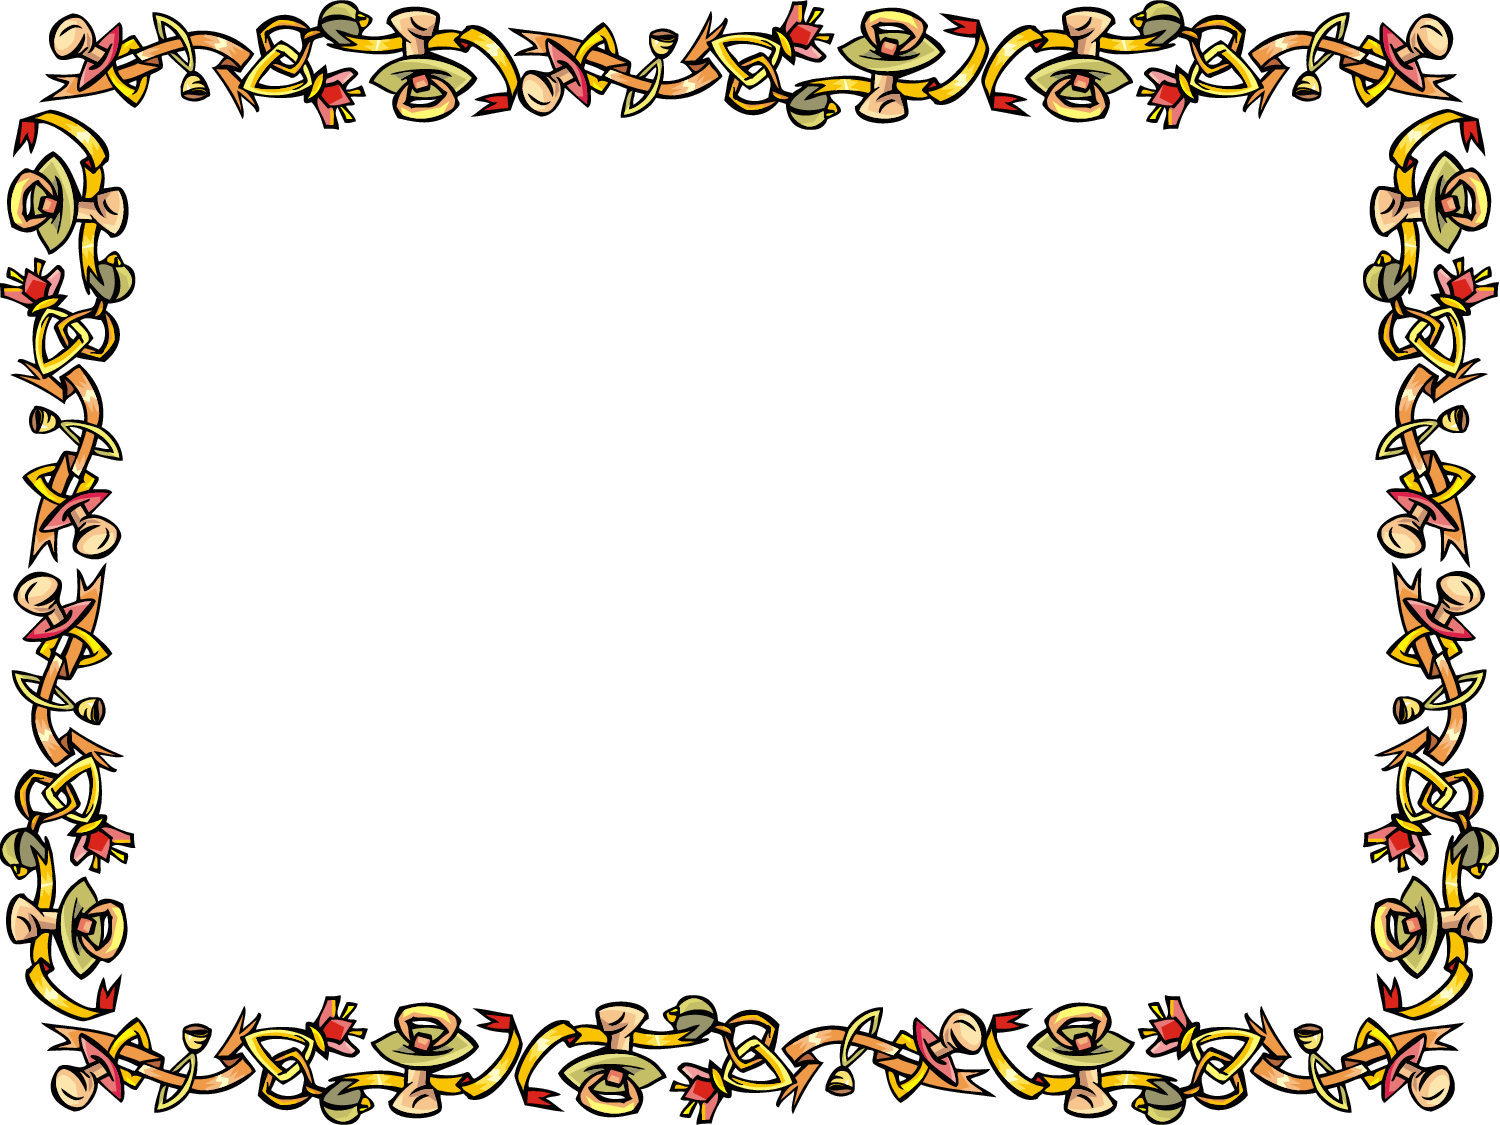 Free Powerpoint Template - Ribbon Certificate Border - ClipArt ...